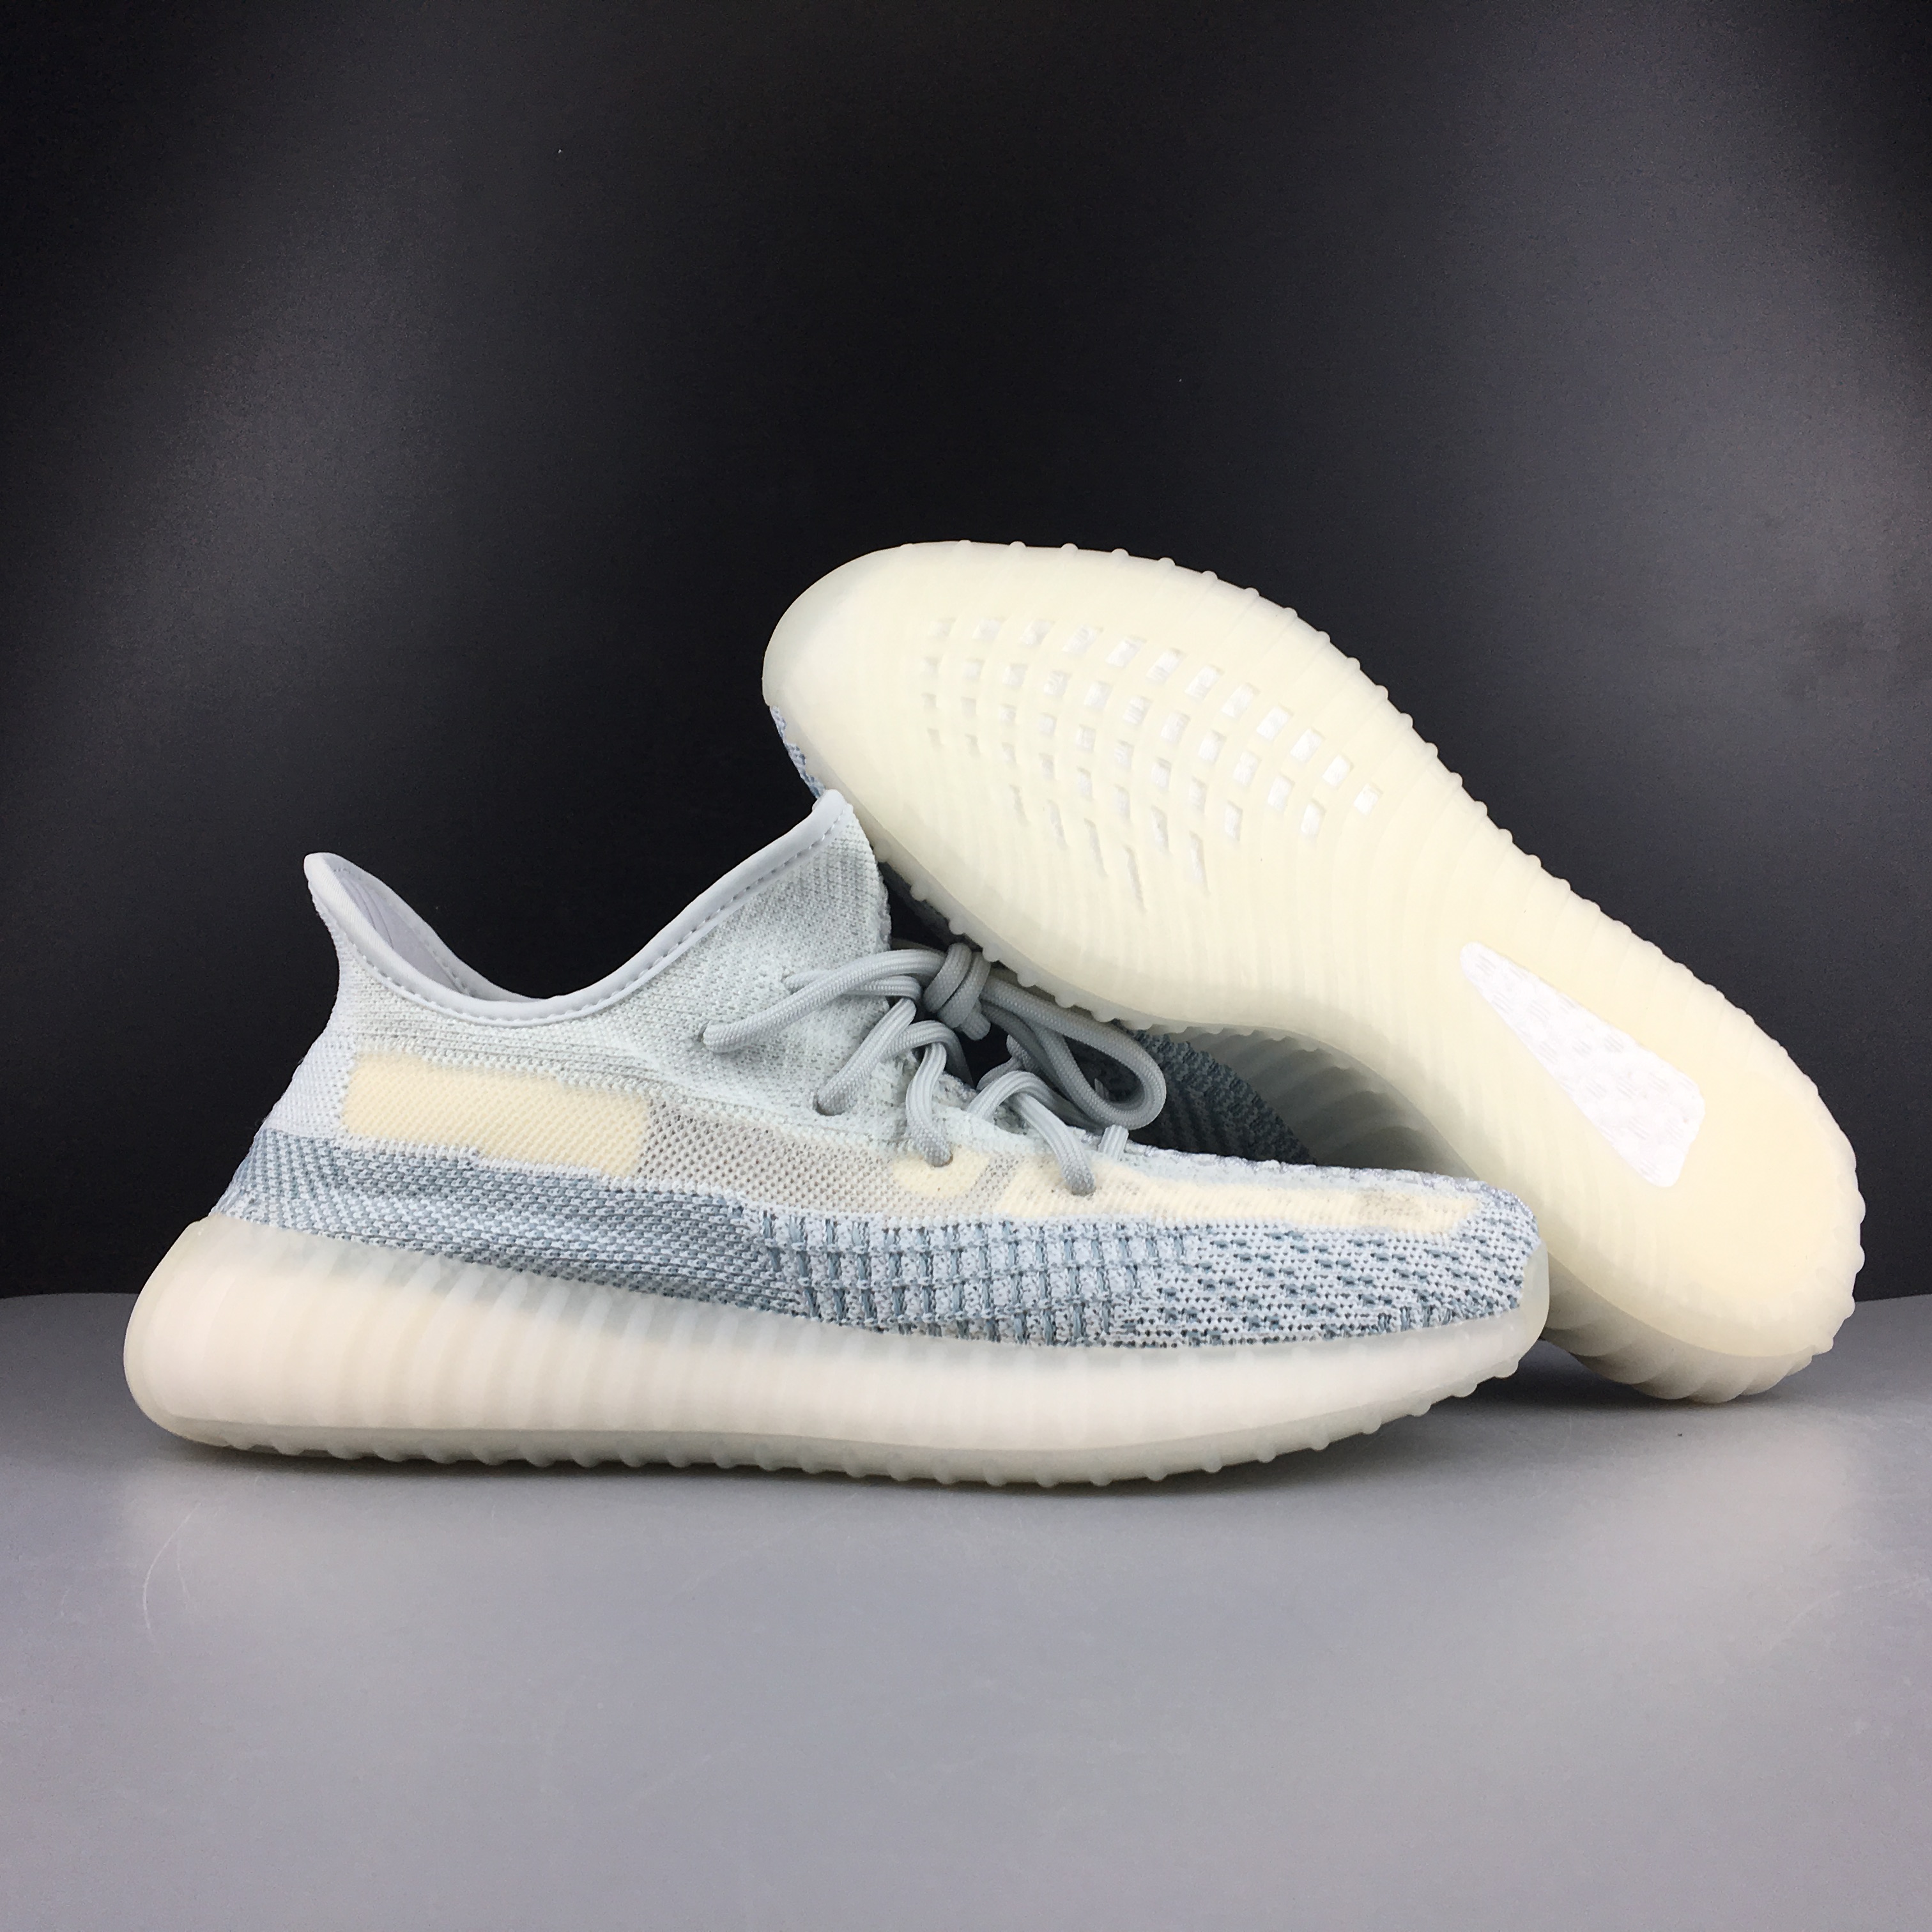 Men's Running Weapon Yeezy 350 V2 Shoes 007